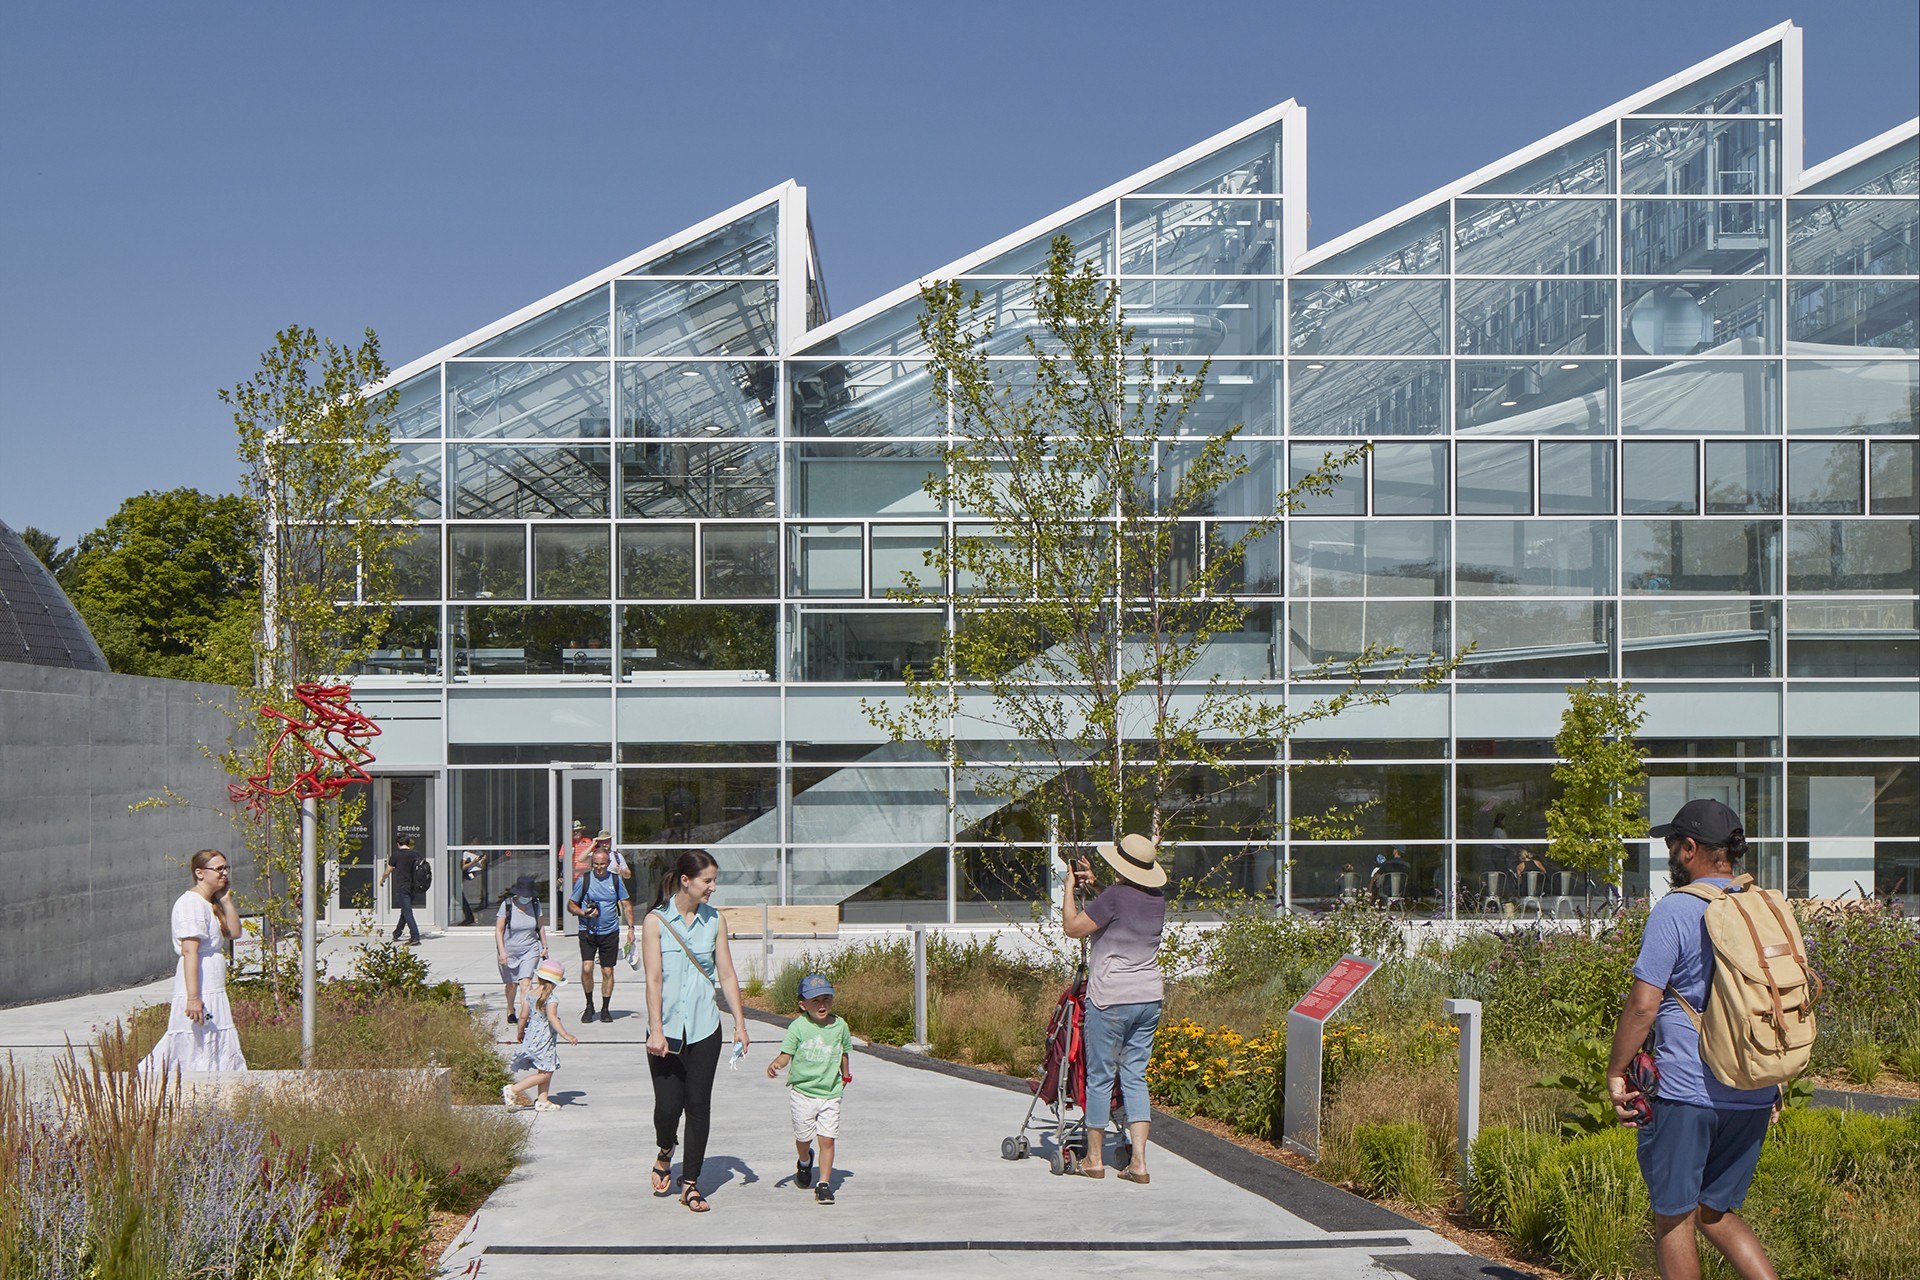 The Metamorphosis of the Montréal Insectarium receives LEED Gold certification